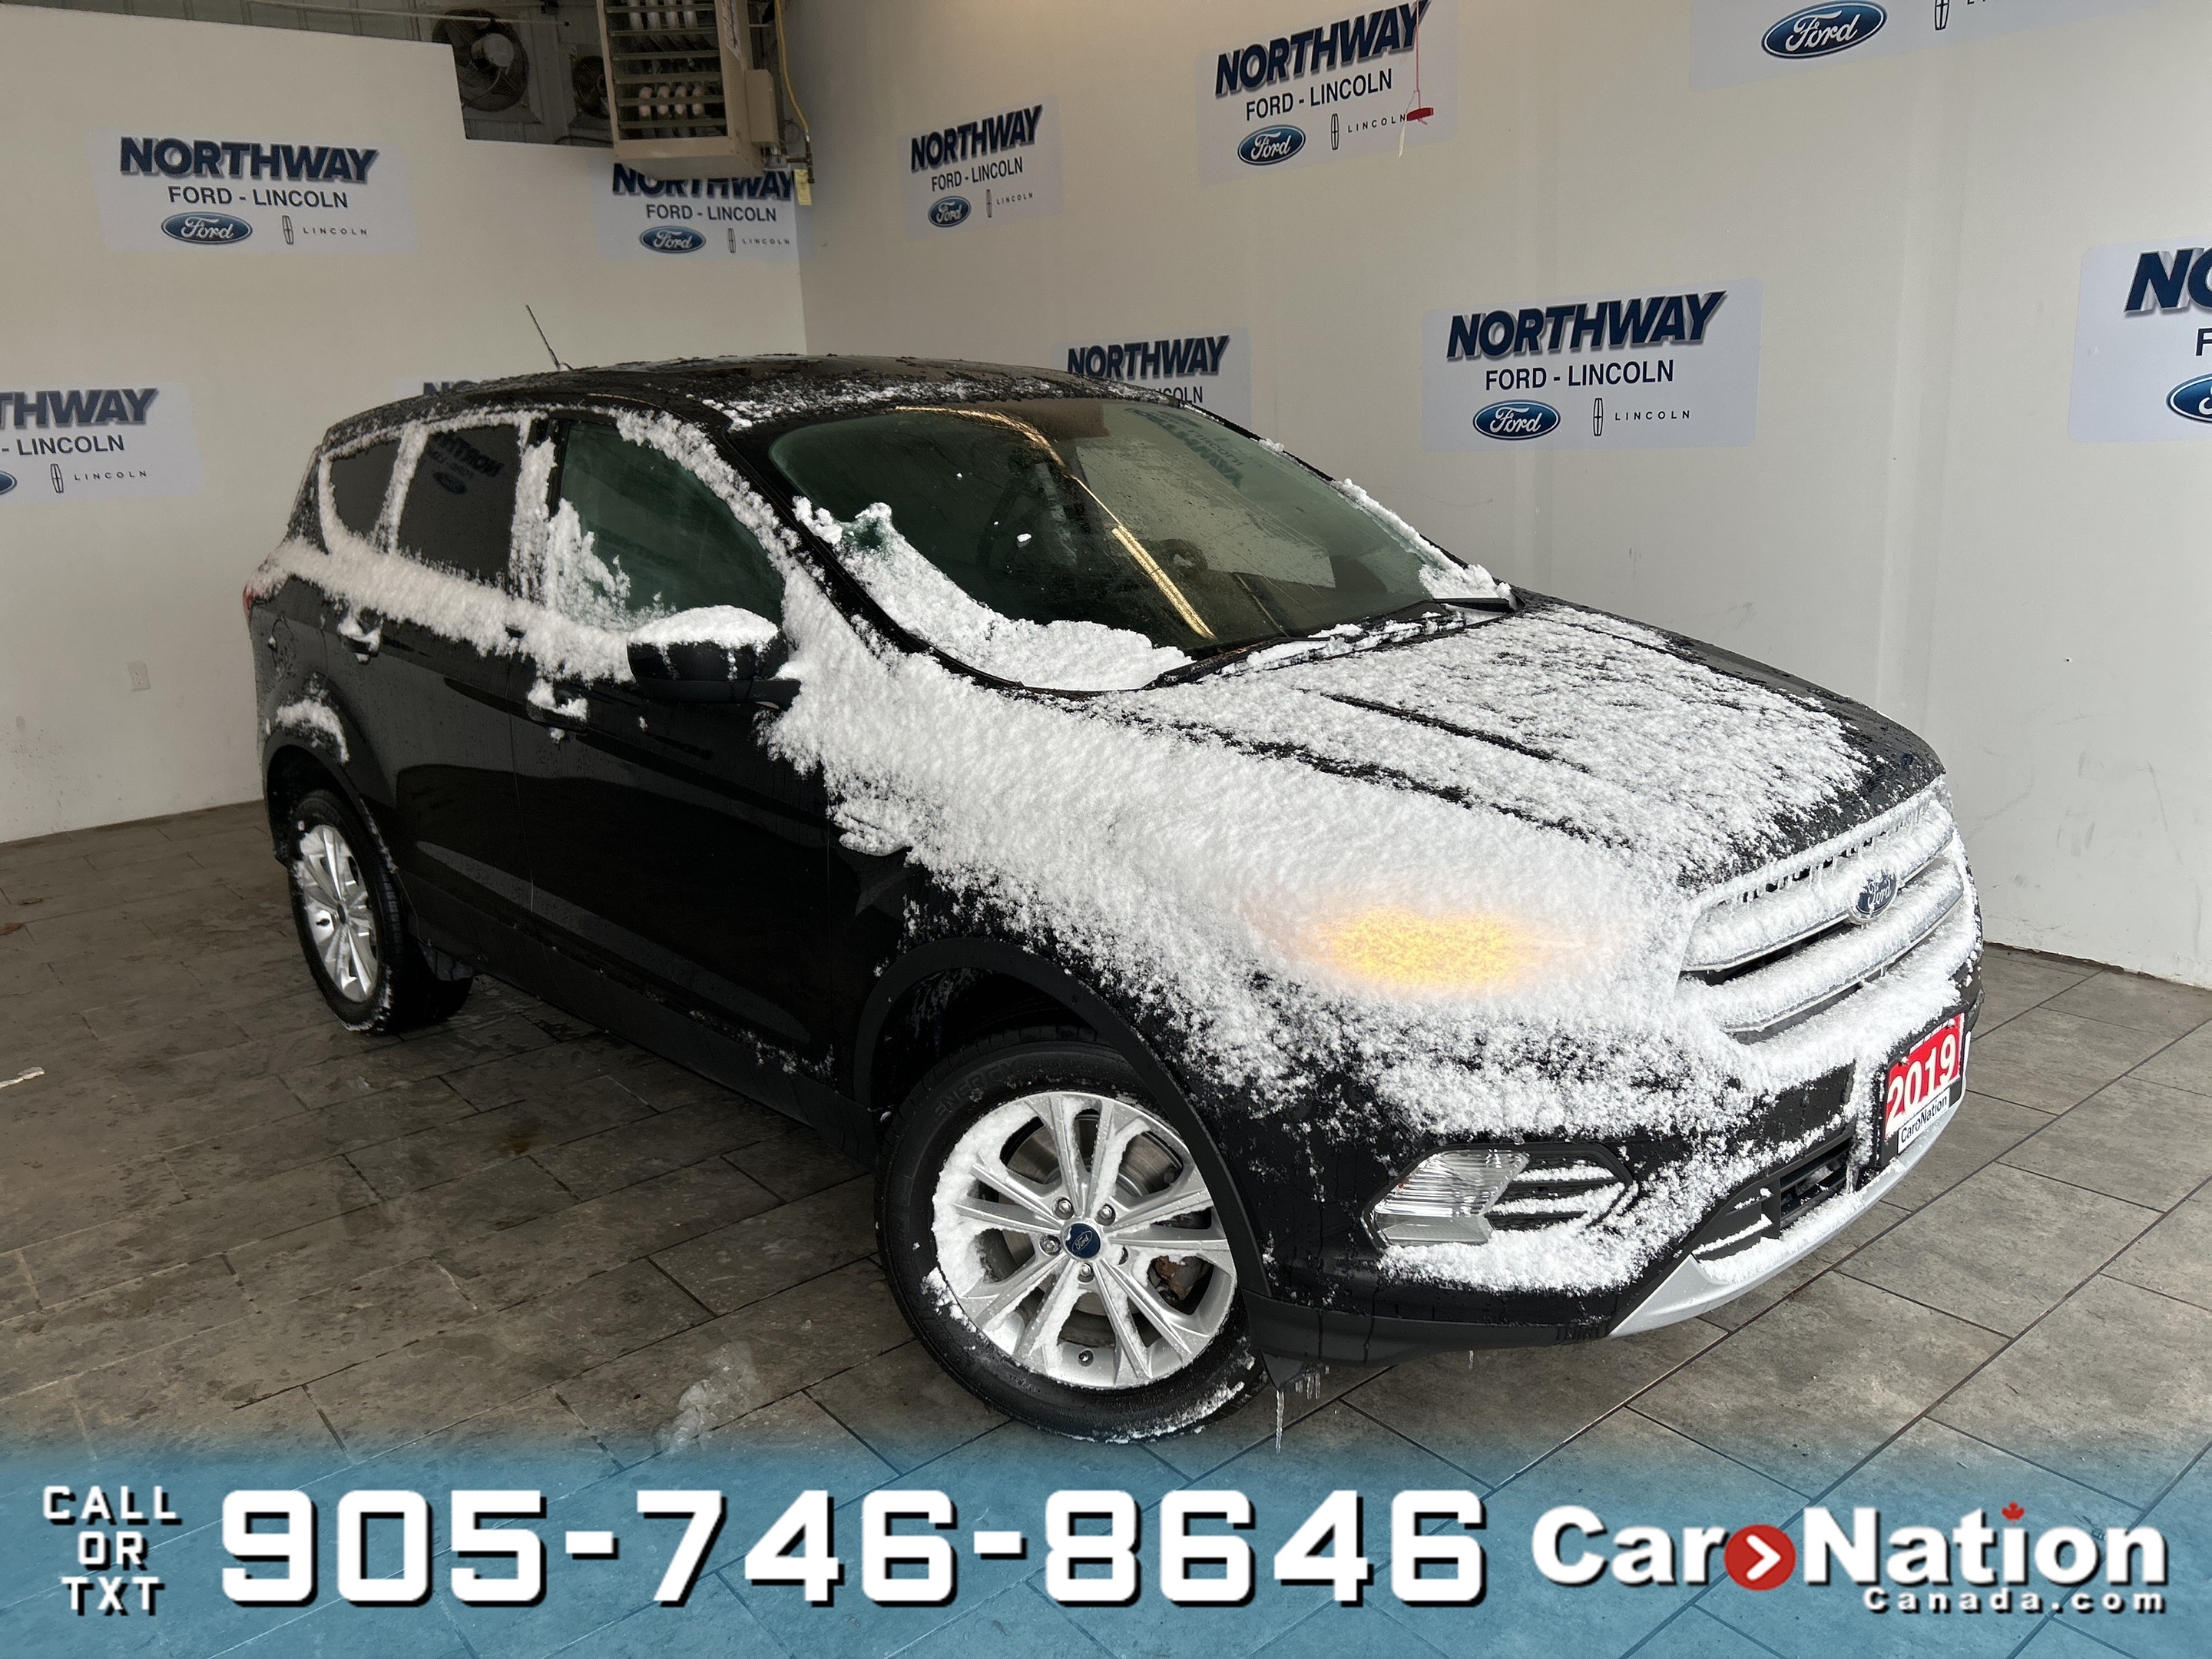 2019 Ford Escape SE | 4X4 | TOUCHSCREEN | WE WANT YOUR TRADE! 